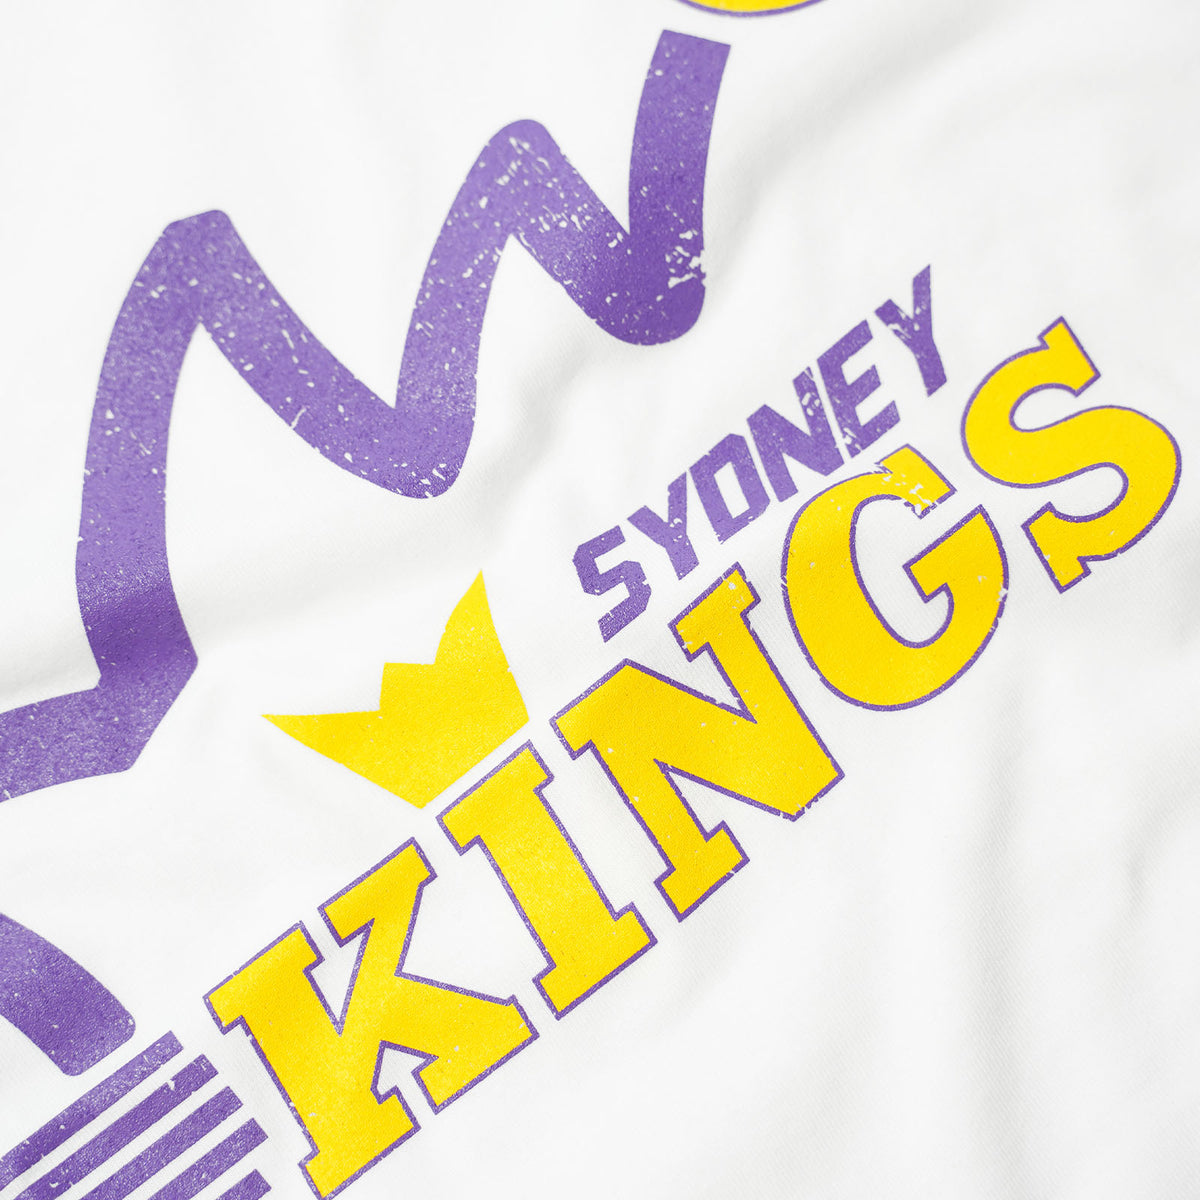 Sydney Kings X Throwback Heritage Graphic Tee - White